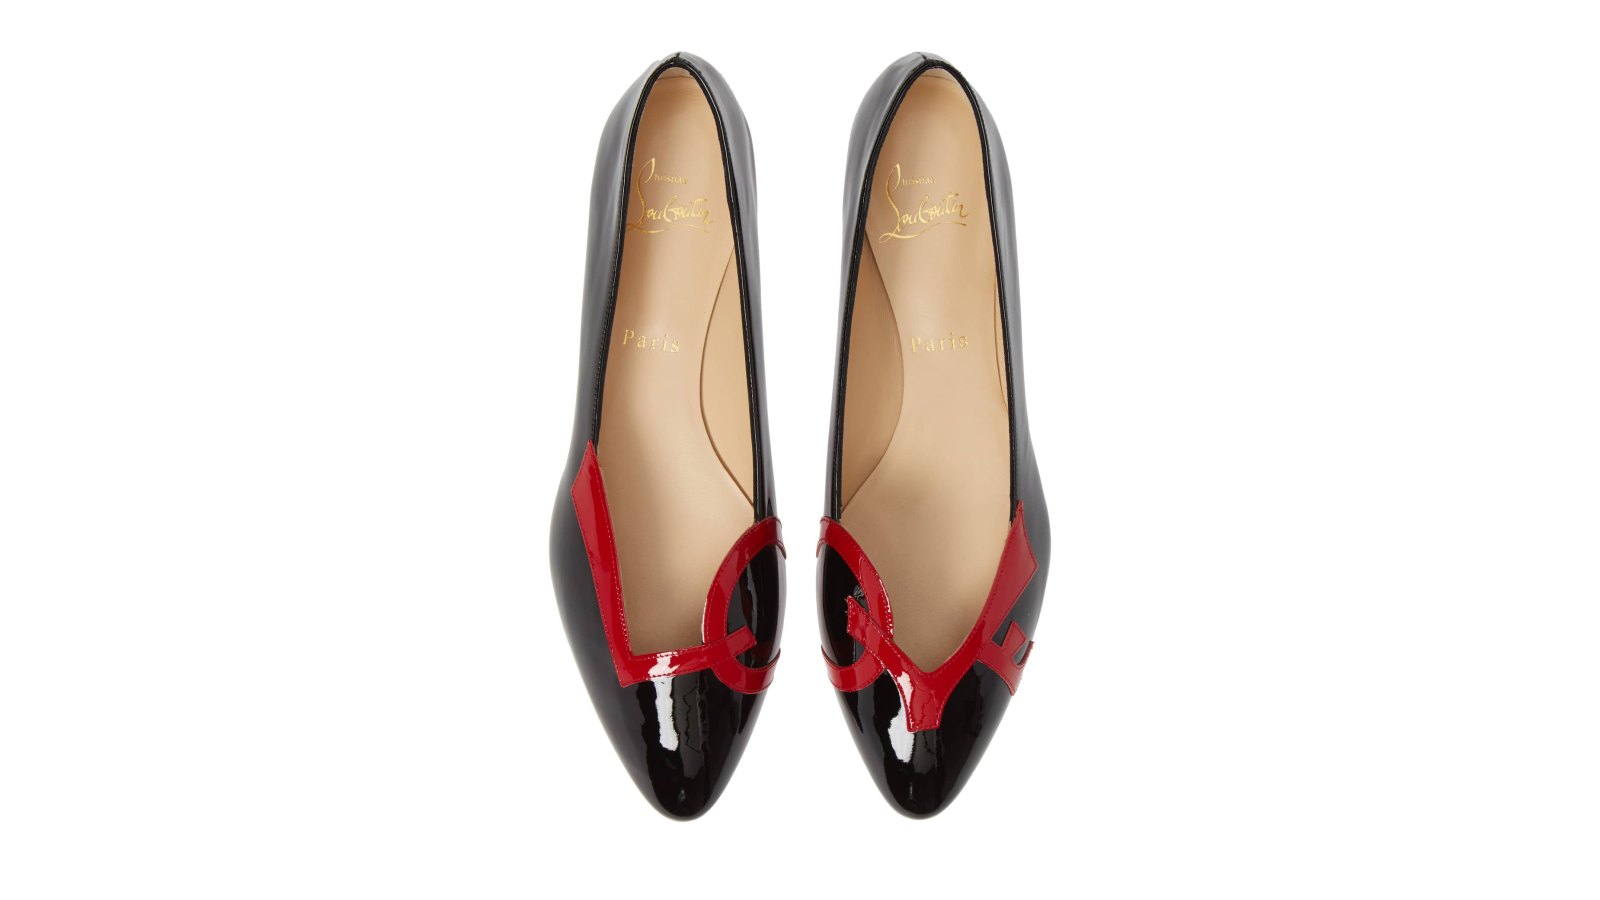 Christian Louboutin Shoes in Ghana for sale / Price in October